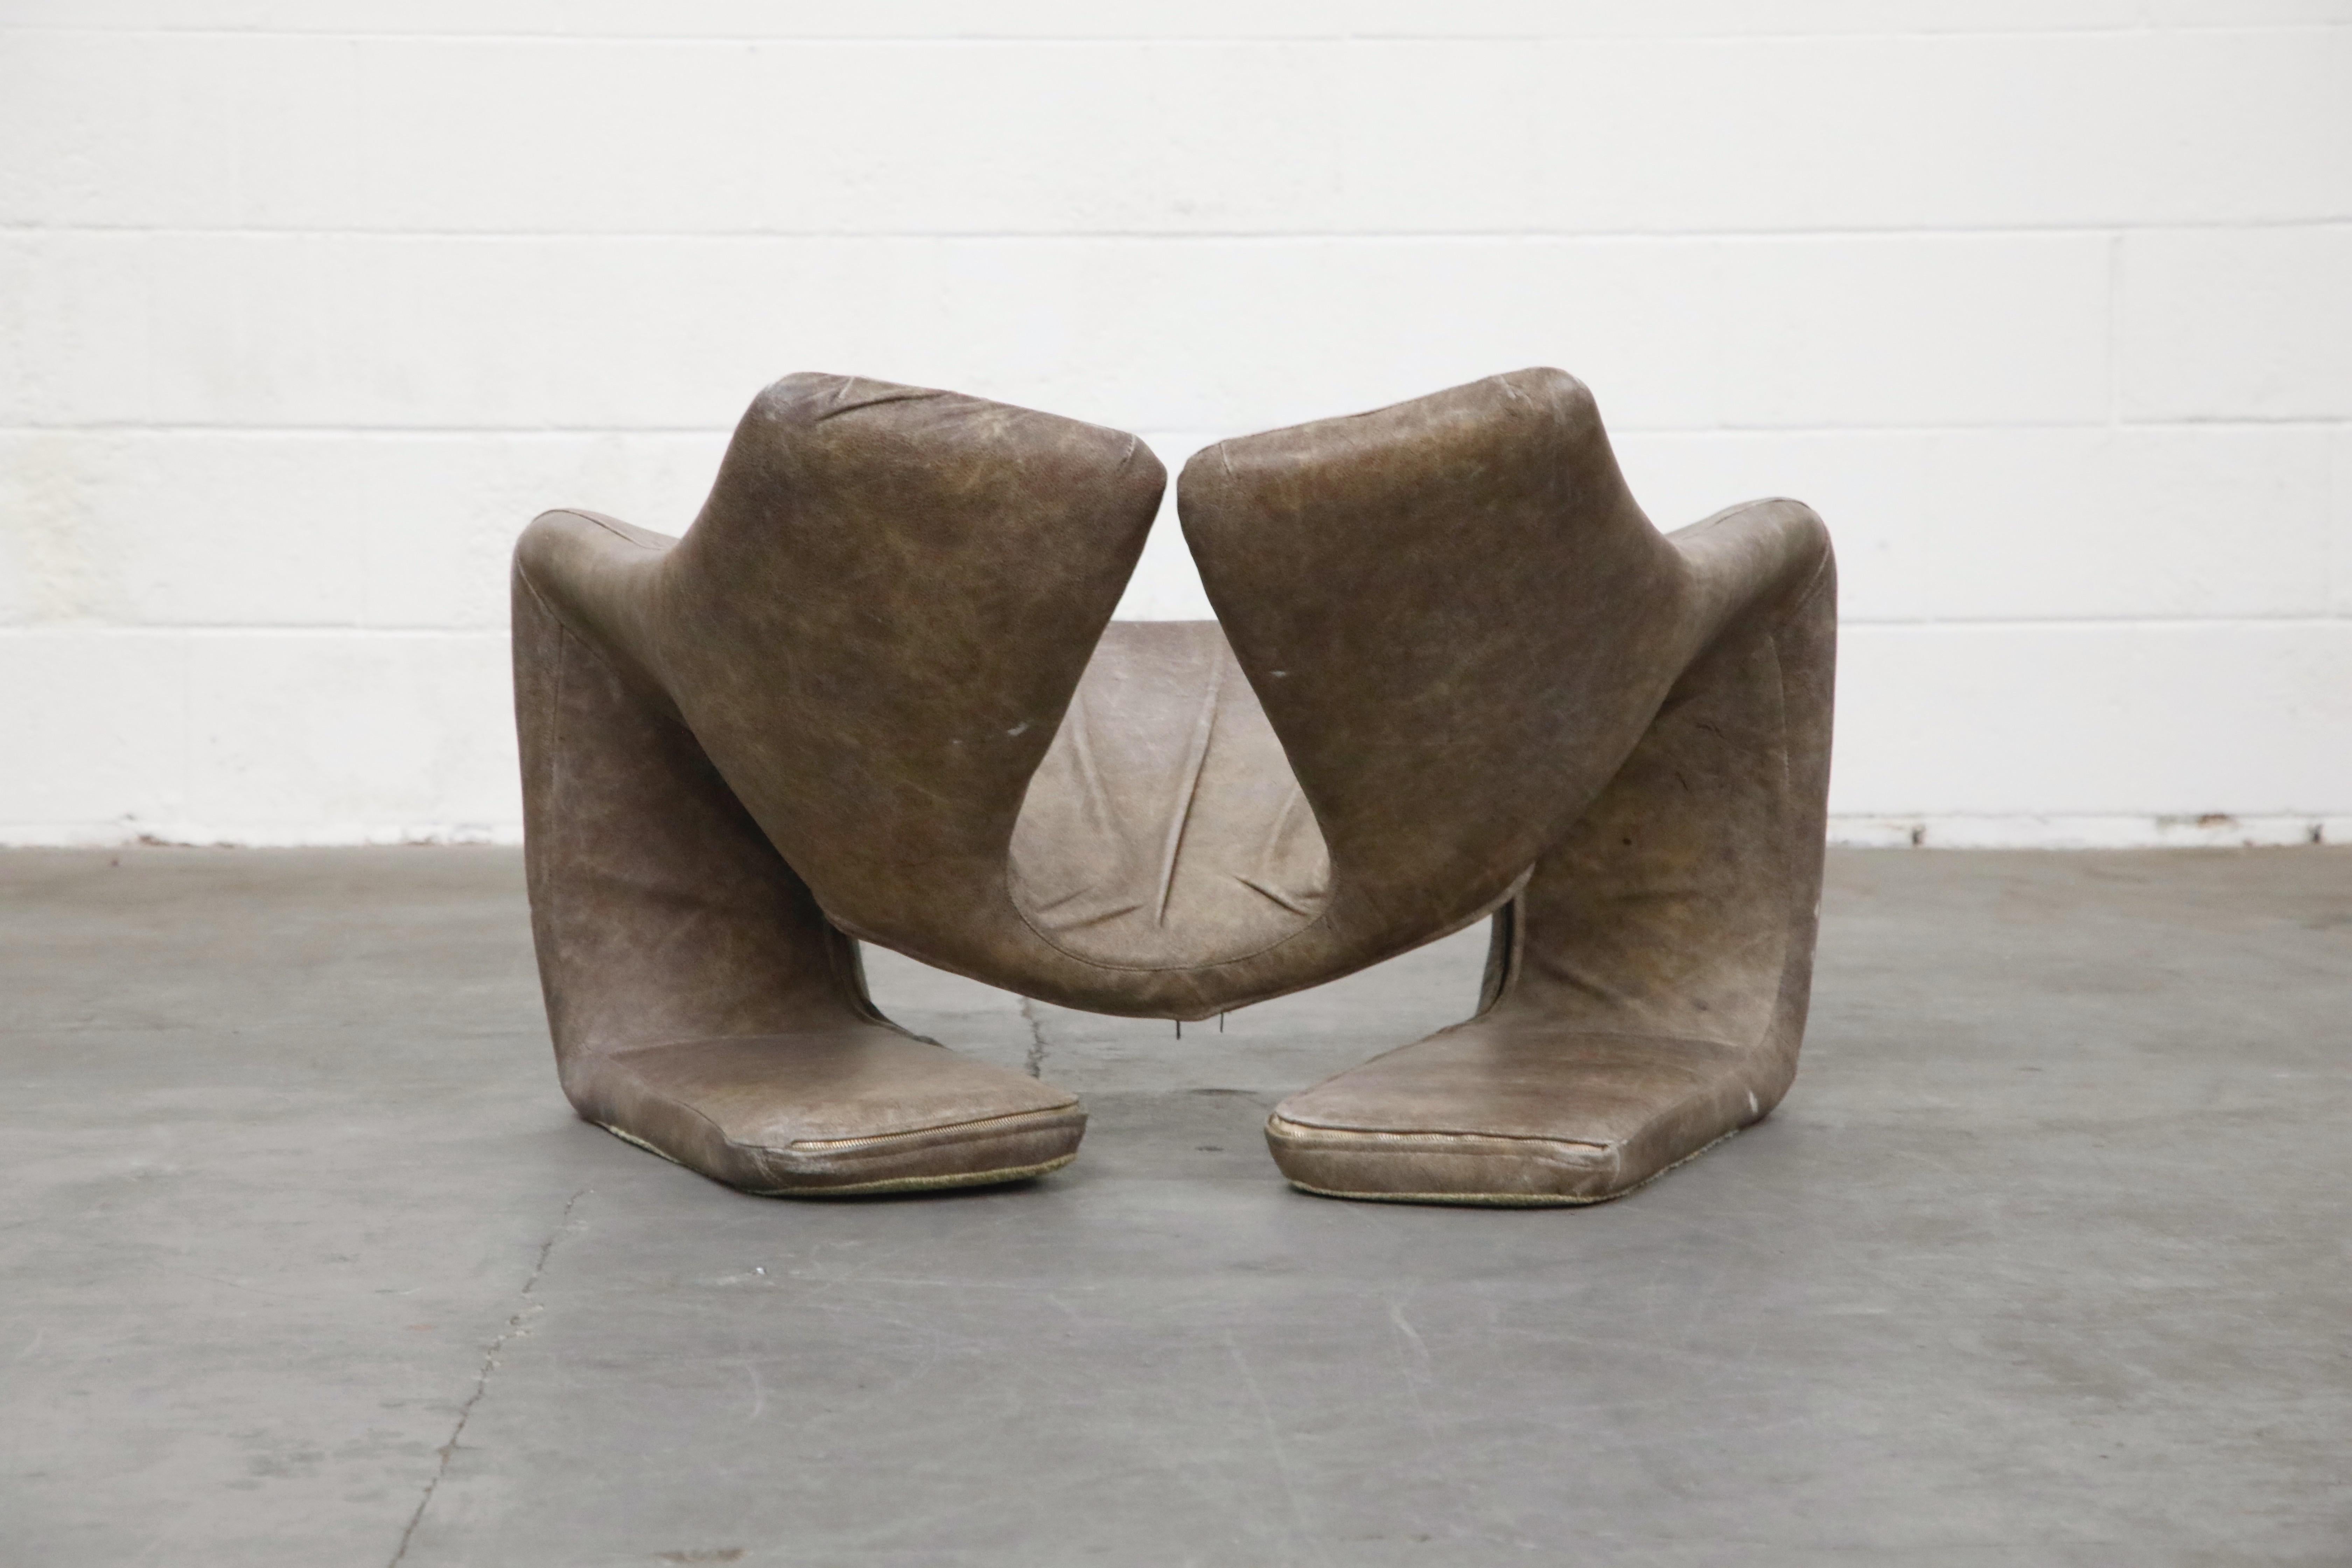 'Zen' Leather Lounge Chair by Kwok Hoi Chan for Steiner, Paris France, 1970s 3